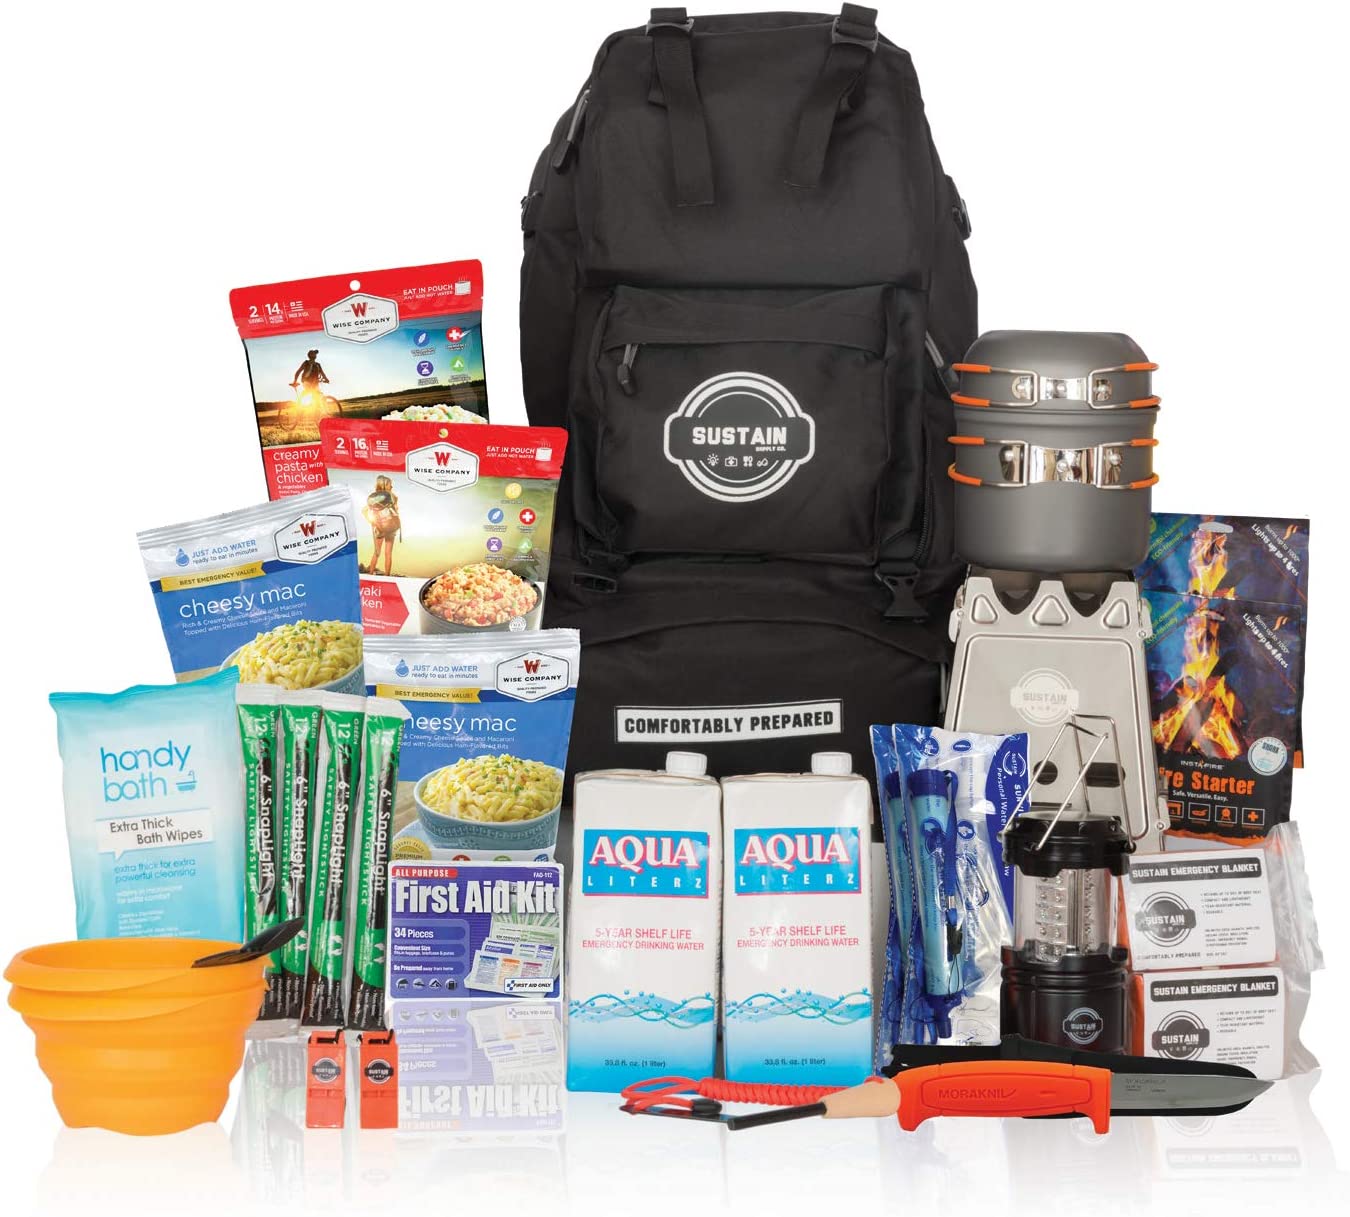 Sustain Supply Survival Backpack – Food, Water, Lighting, First Aid, and Other Emergency Preparations for Two People to Survive for 72 Hours (Hurricane/ Earthquake/ Nuclear Survival Kit)